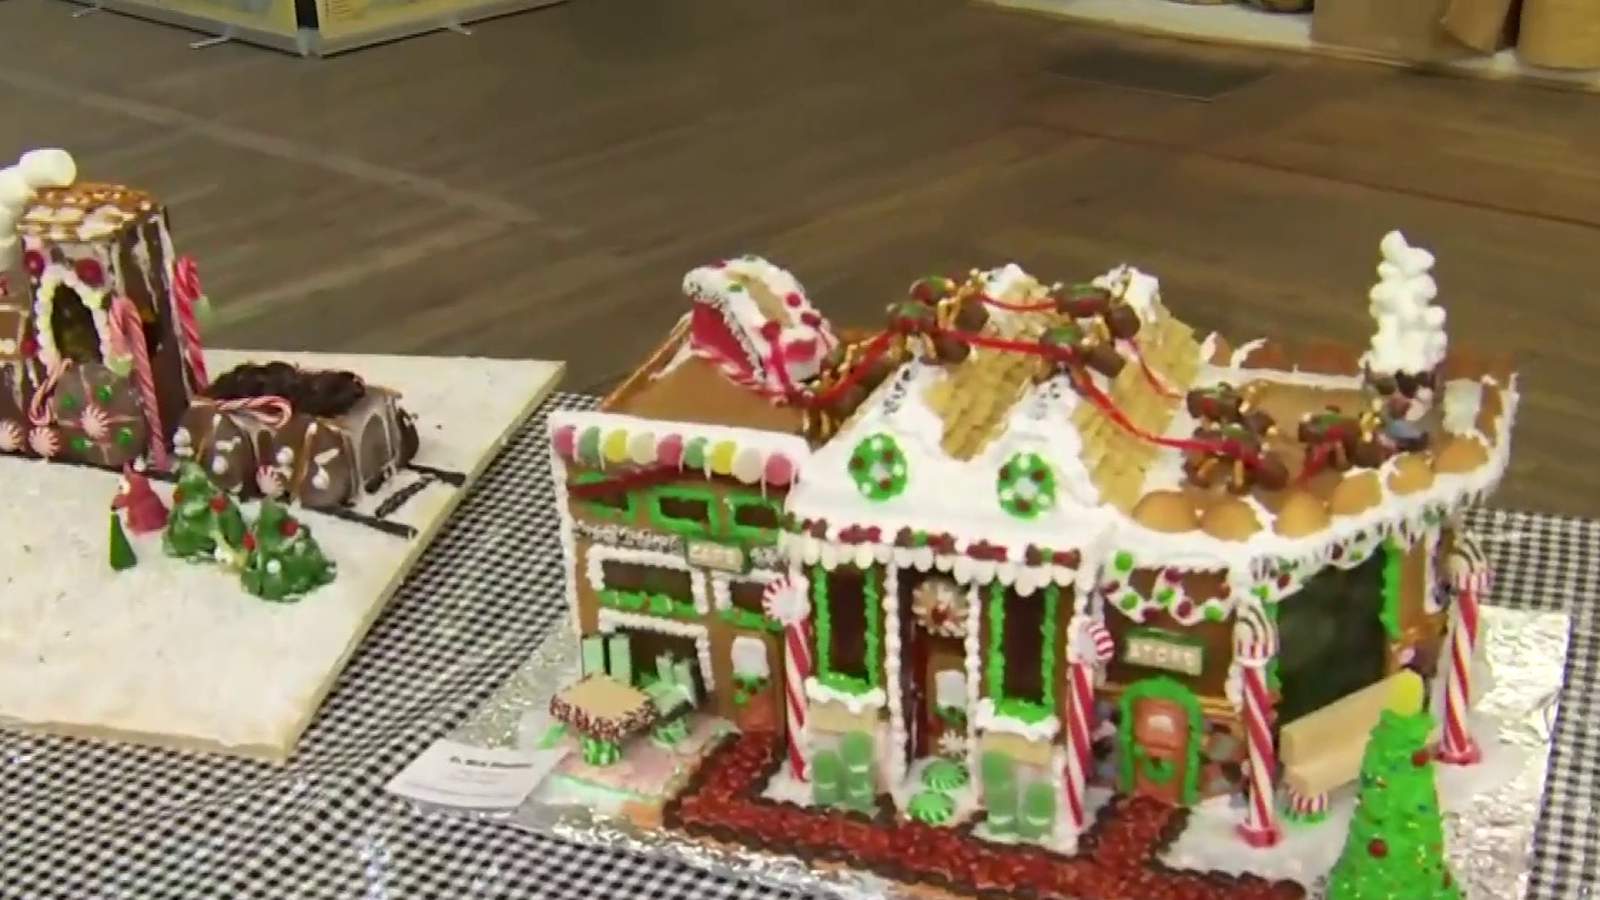 Cast your vote in Floyd gingerbread house contest